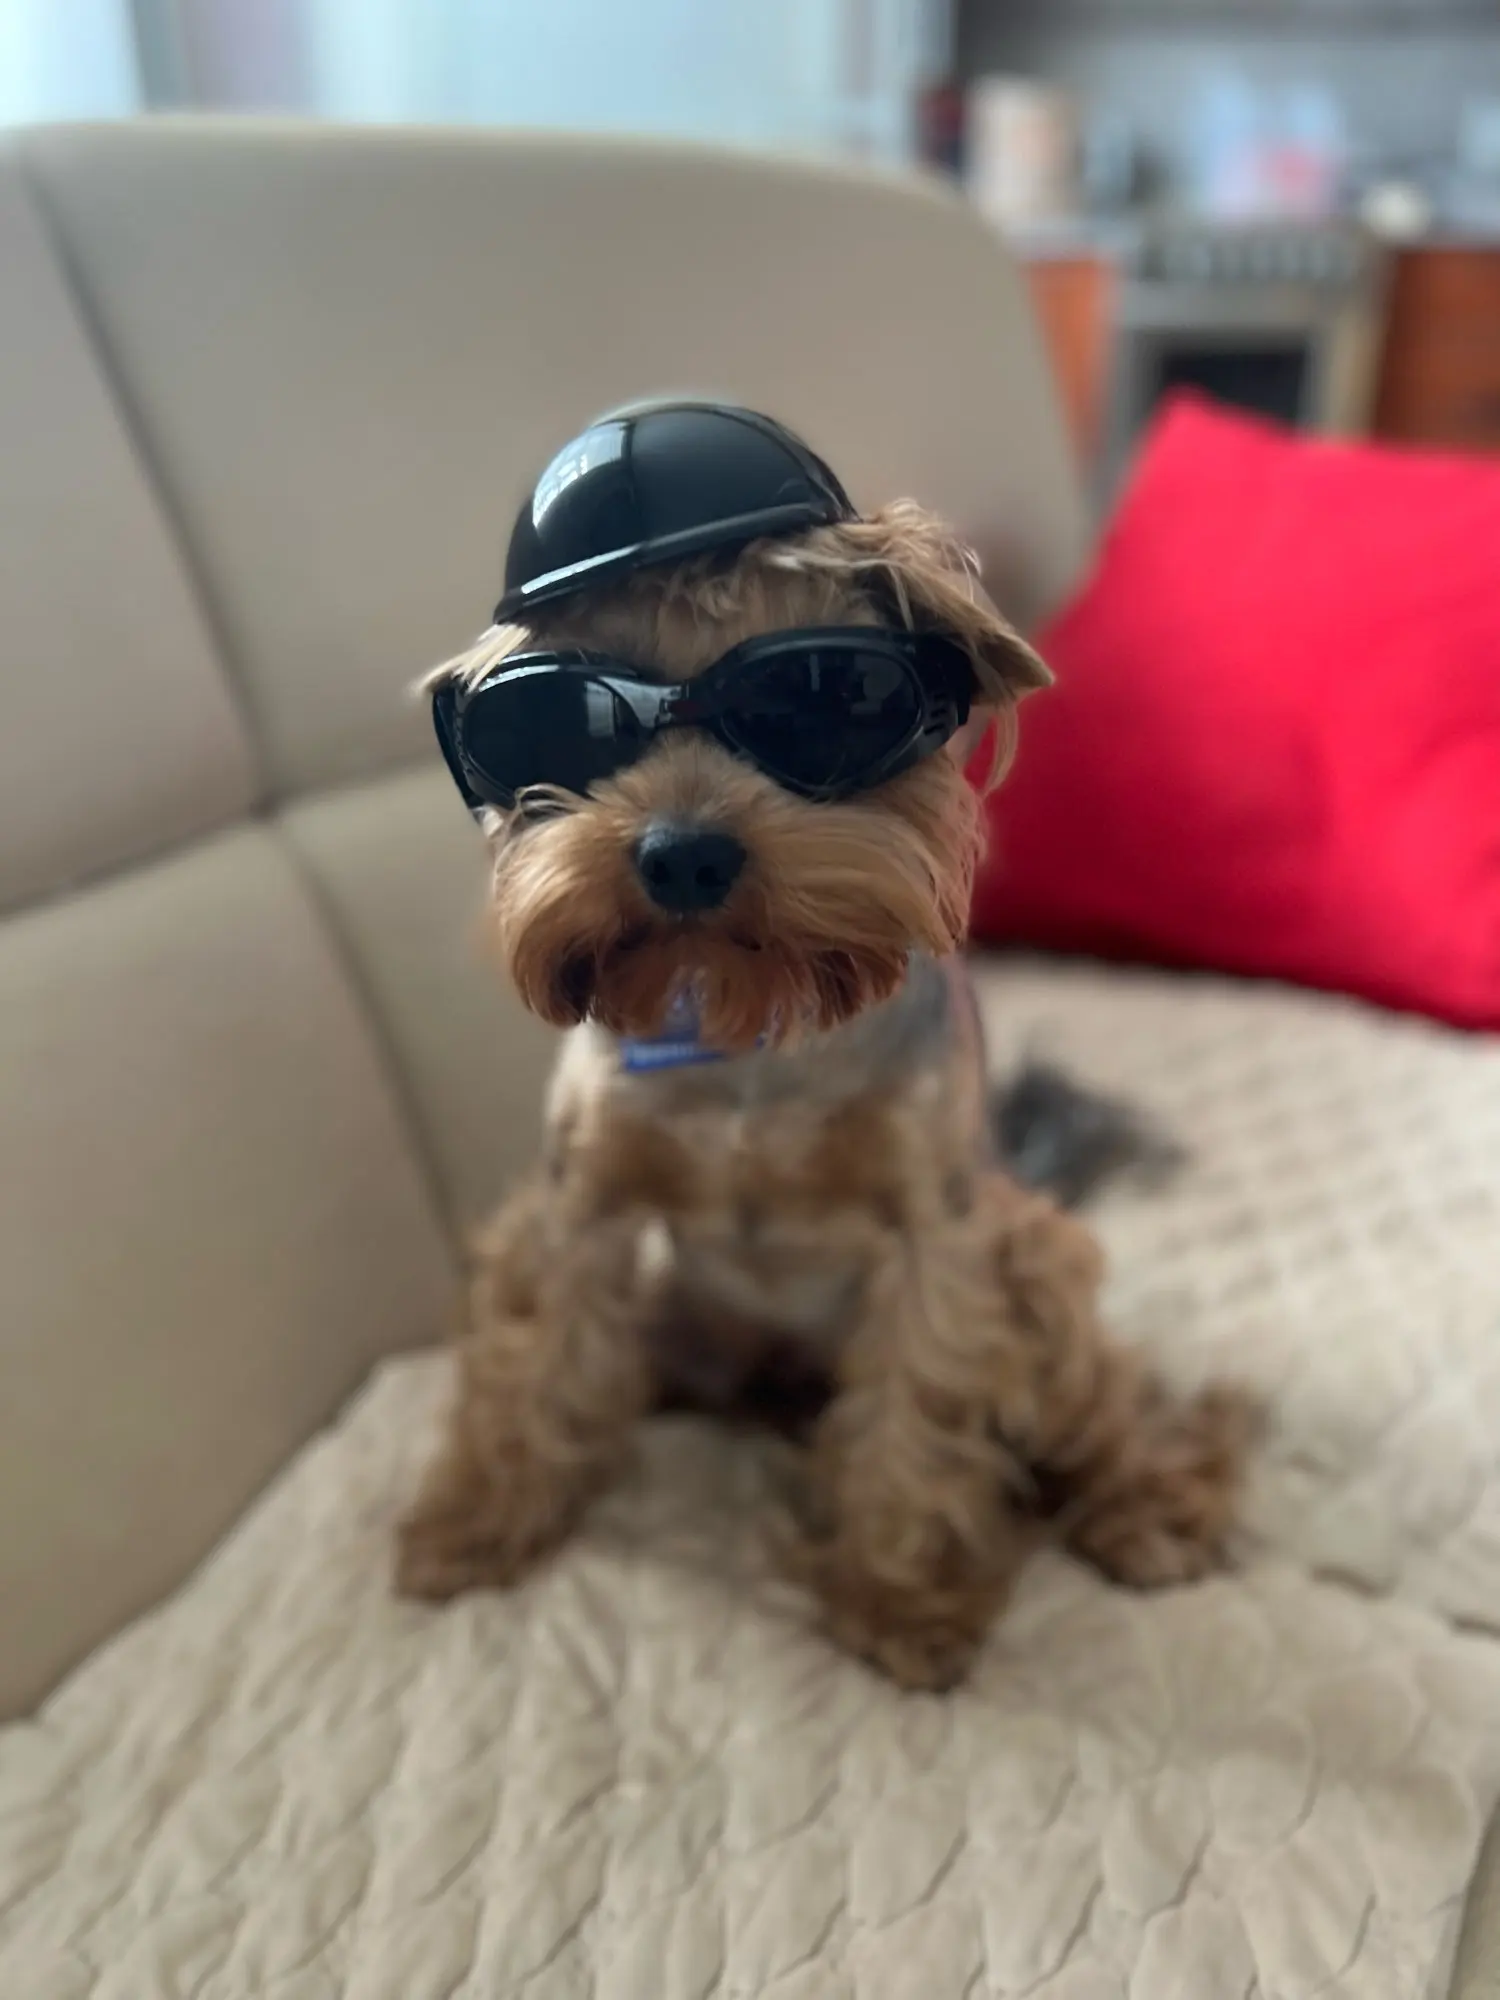 Cool Helmets For Dogs - Decorative Toy Accessories photo review